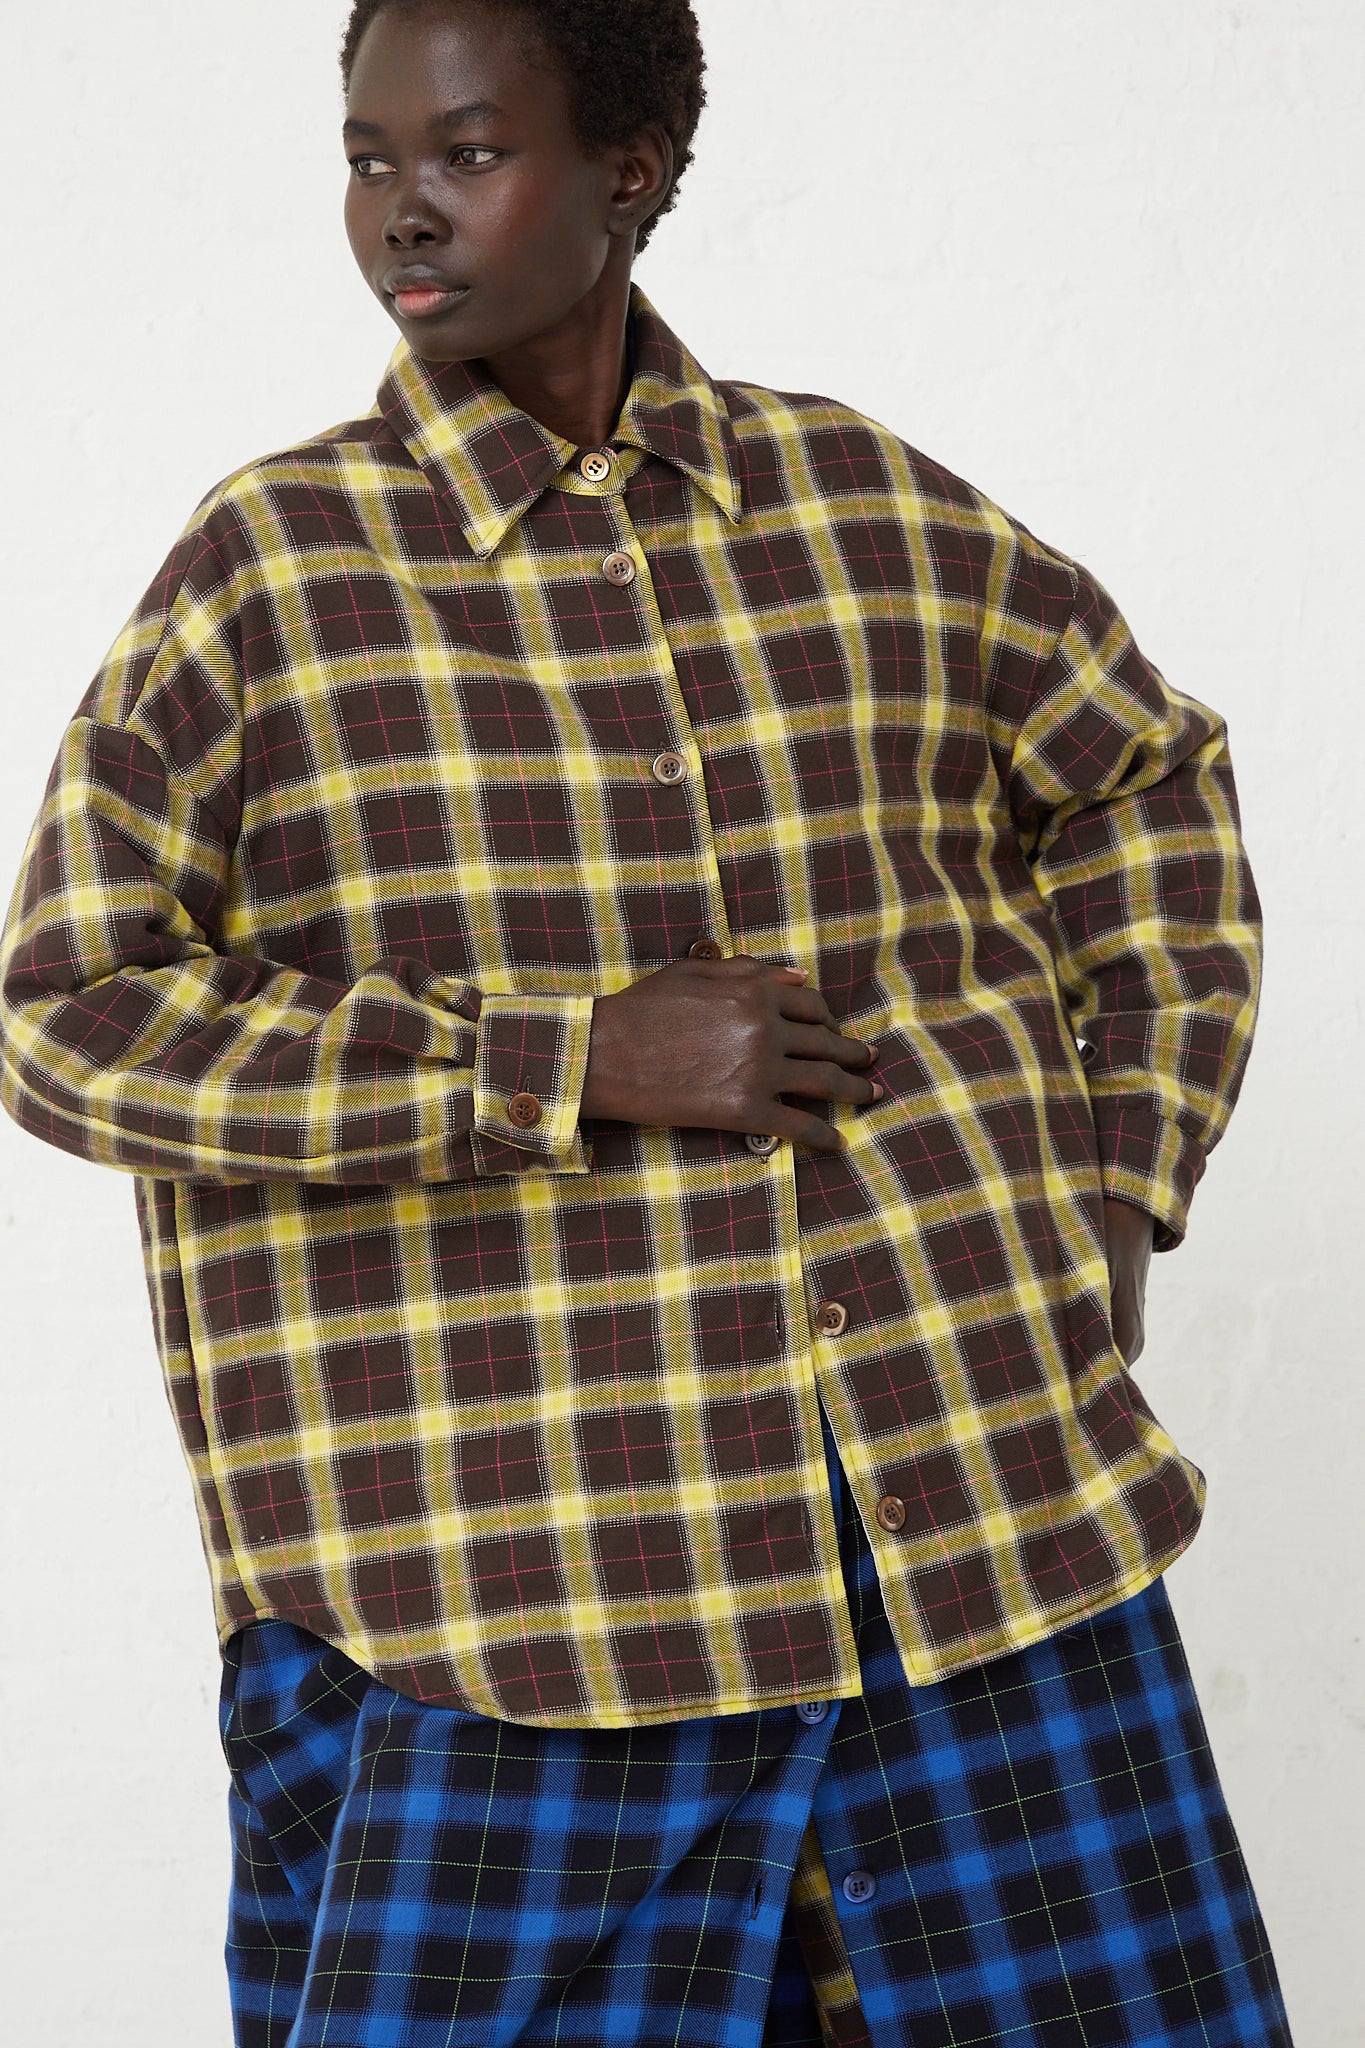 A model wearing an AVN Padding Shirt in Check Brown, Yellow and Pink, made of cotton, perfect for menswear.